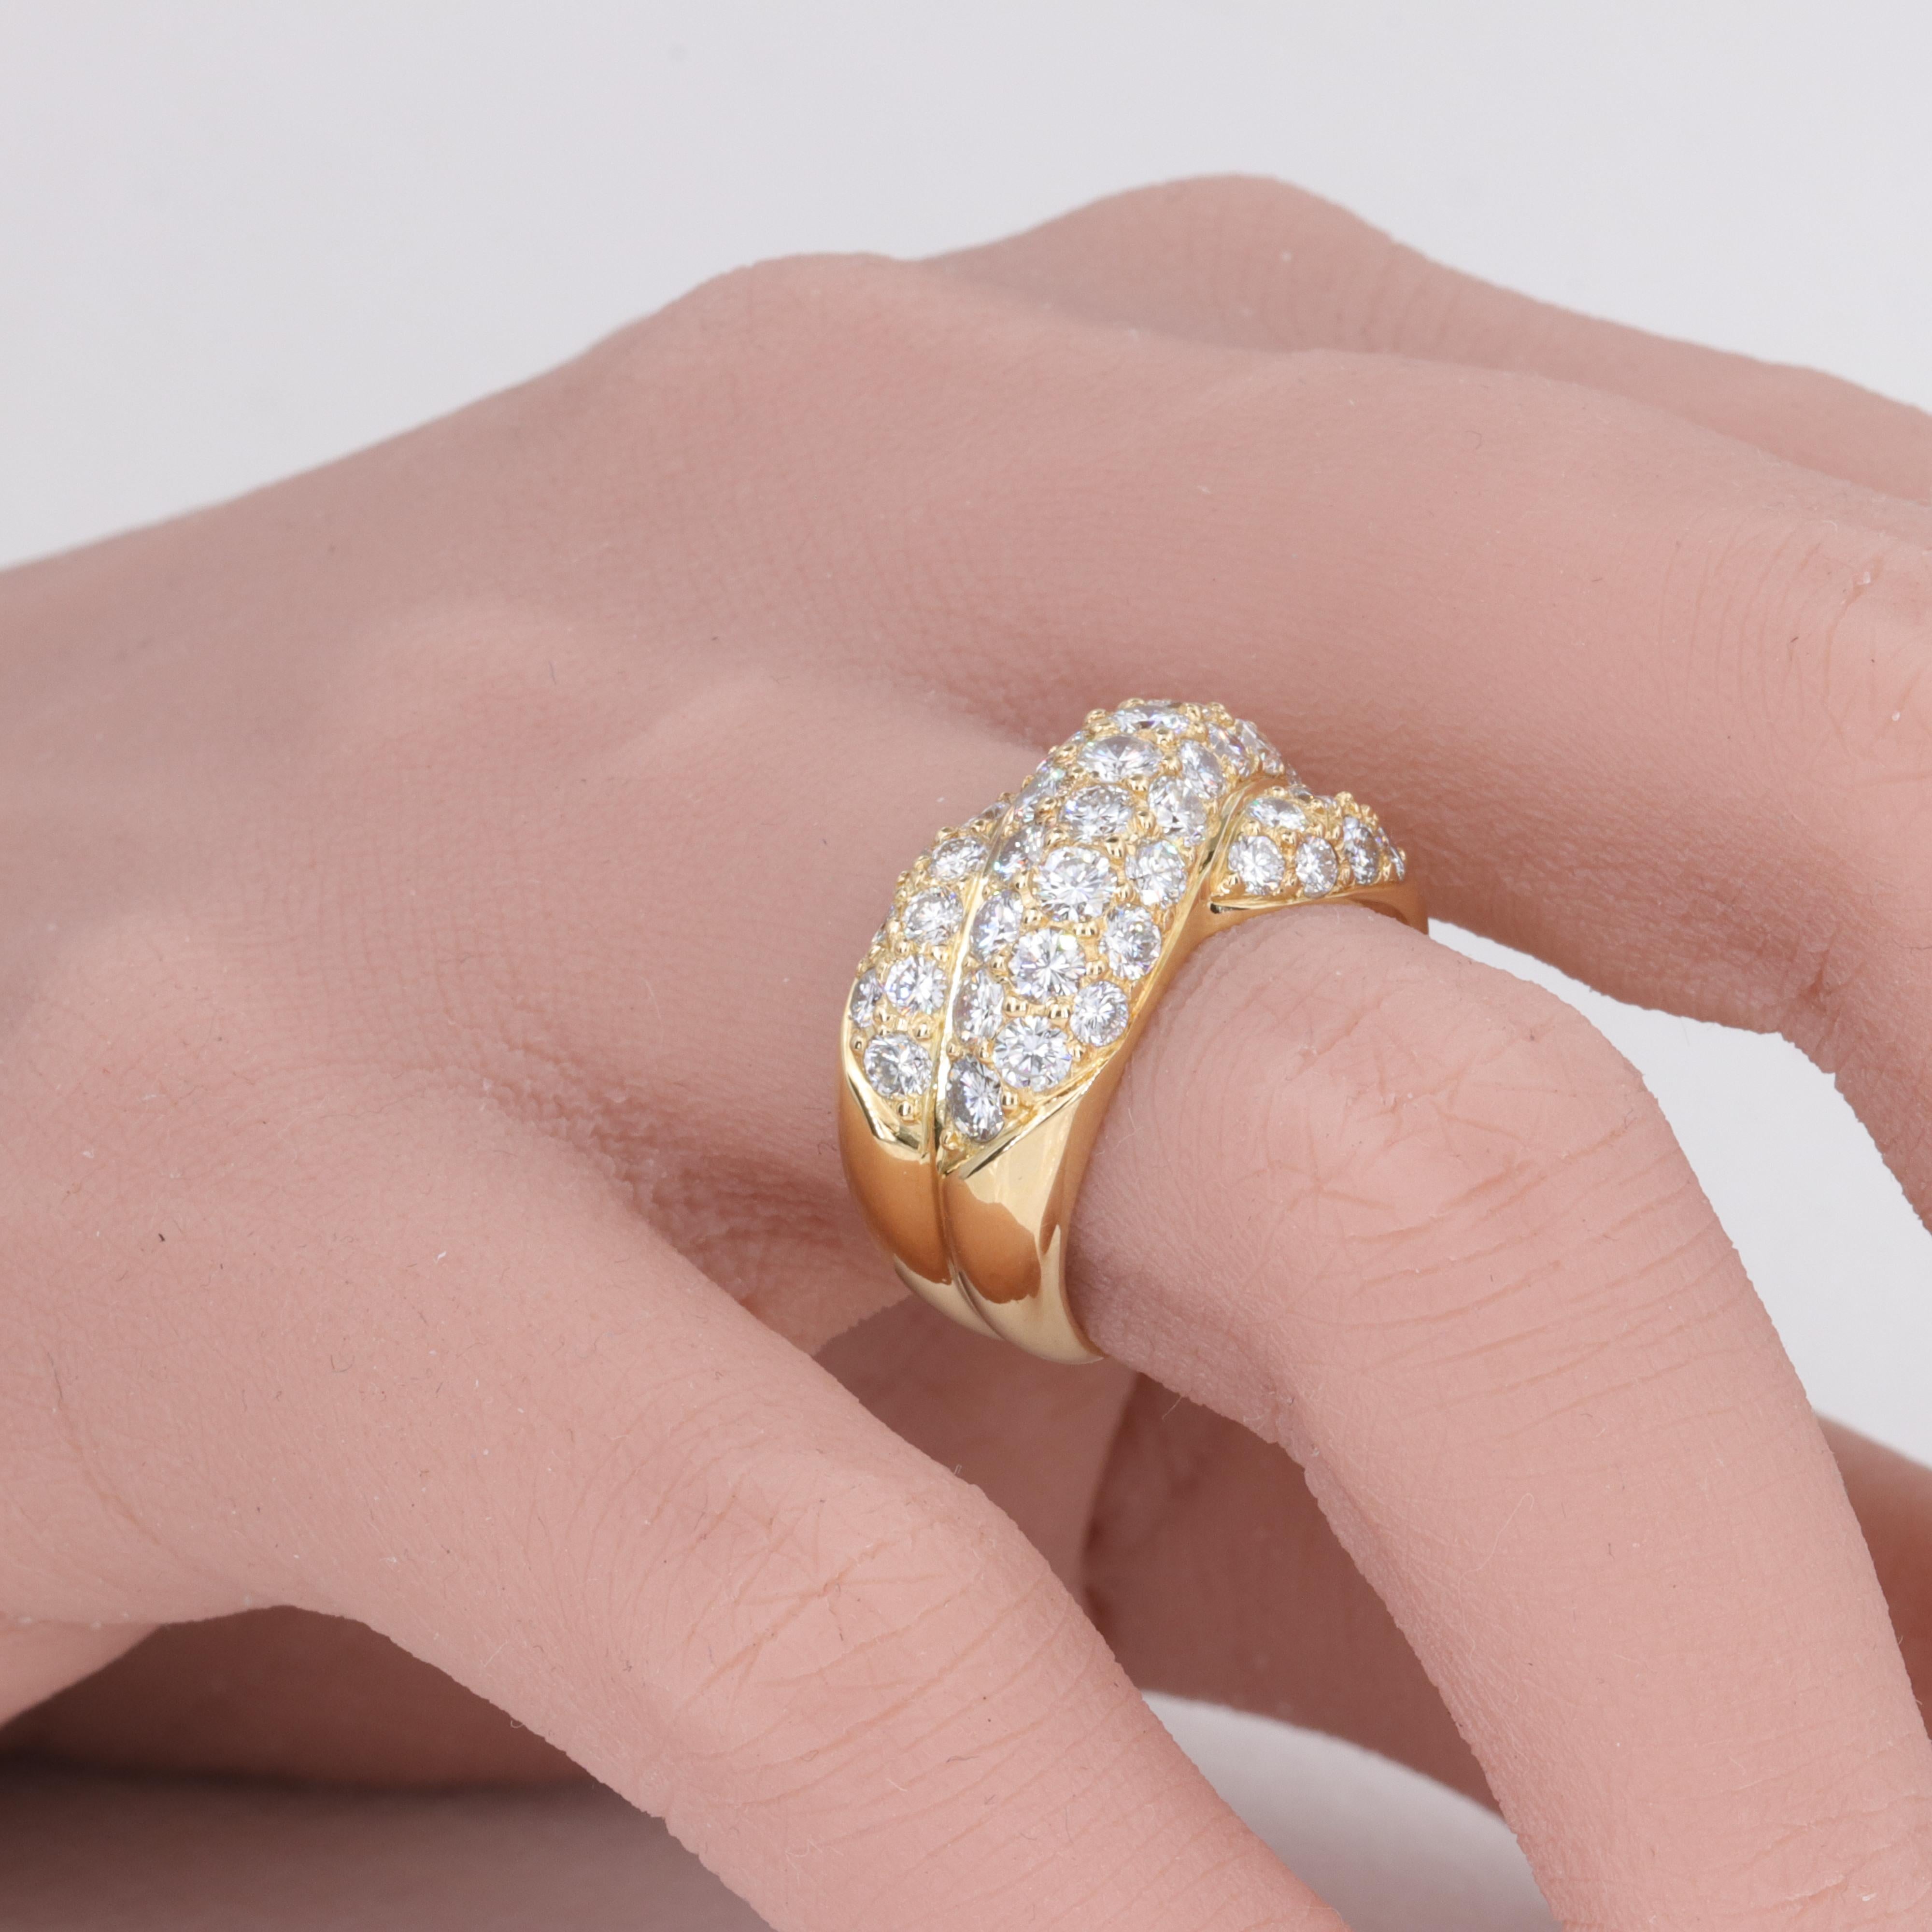 3.35 Carat Diamond and 18 Karat Yellow Gold Cross Over Domed Band 

A finely made diamond and 18 karat yellow gold band, hand set with approximately 3.55 carats of D-F color, VVS-VS clarity diamonds in hand cut a jour. 

The band is a size 5.75 US